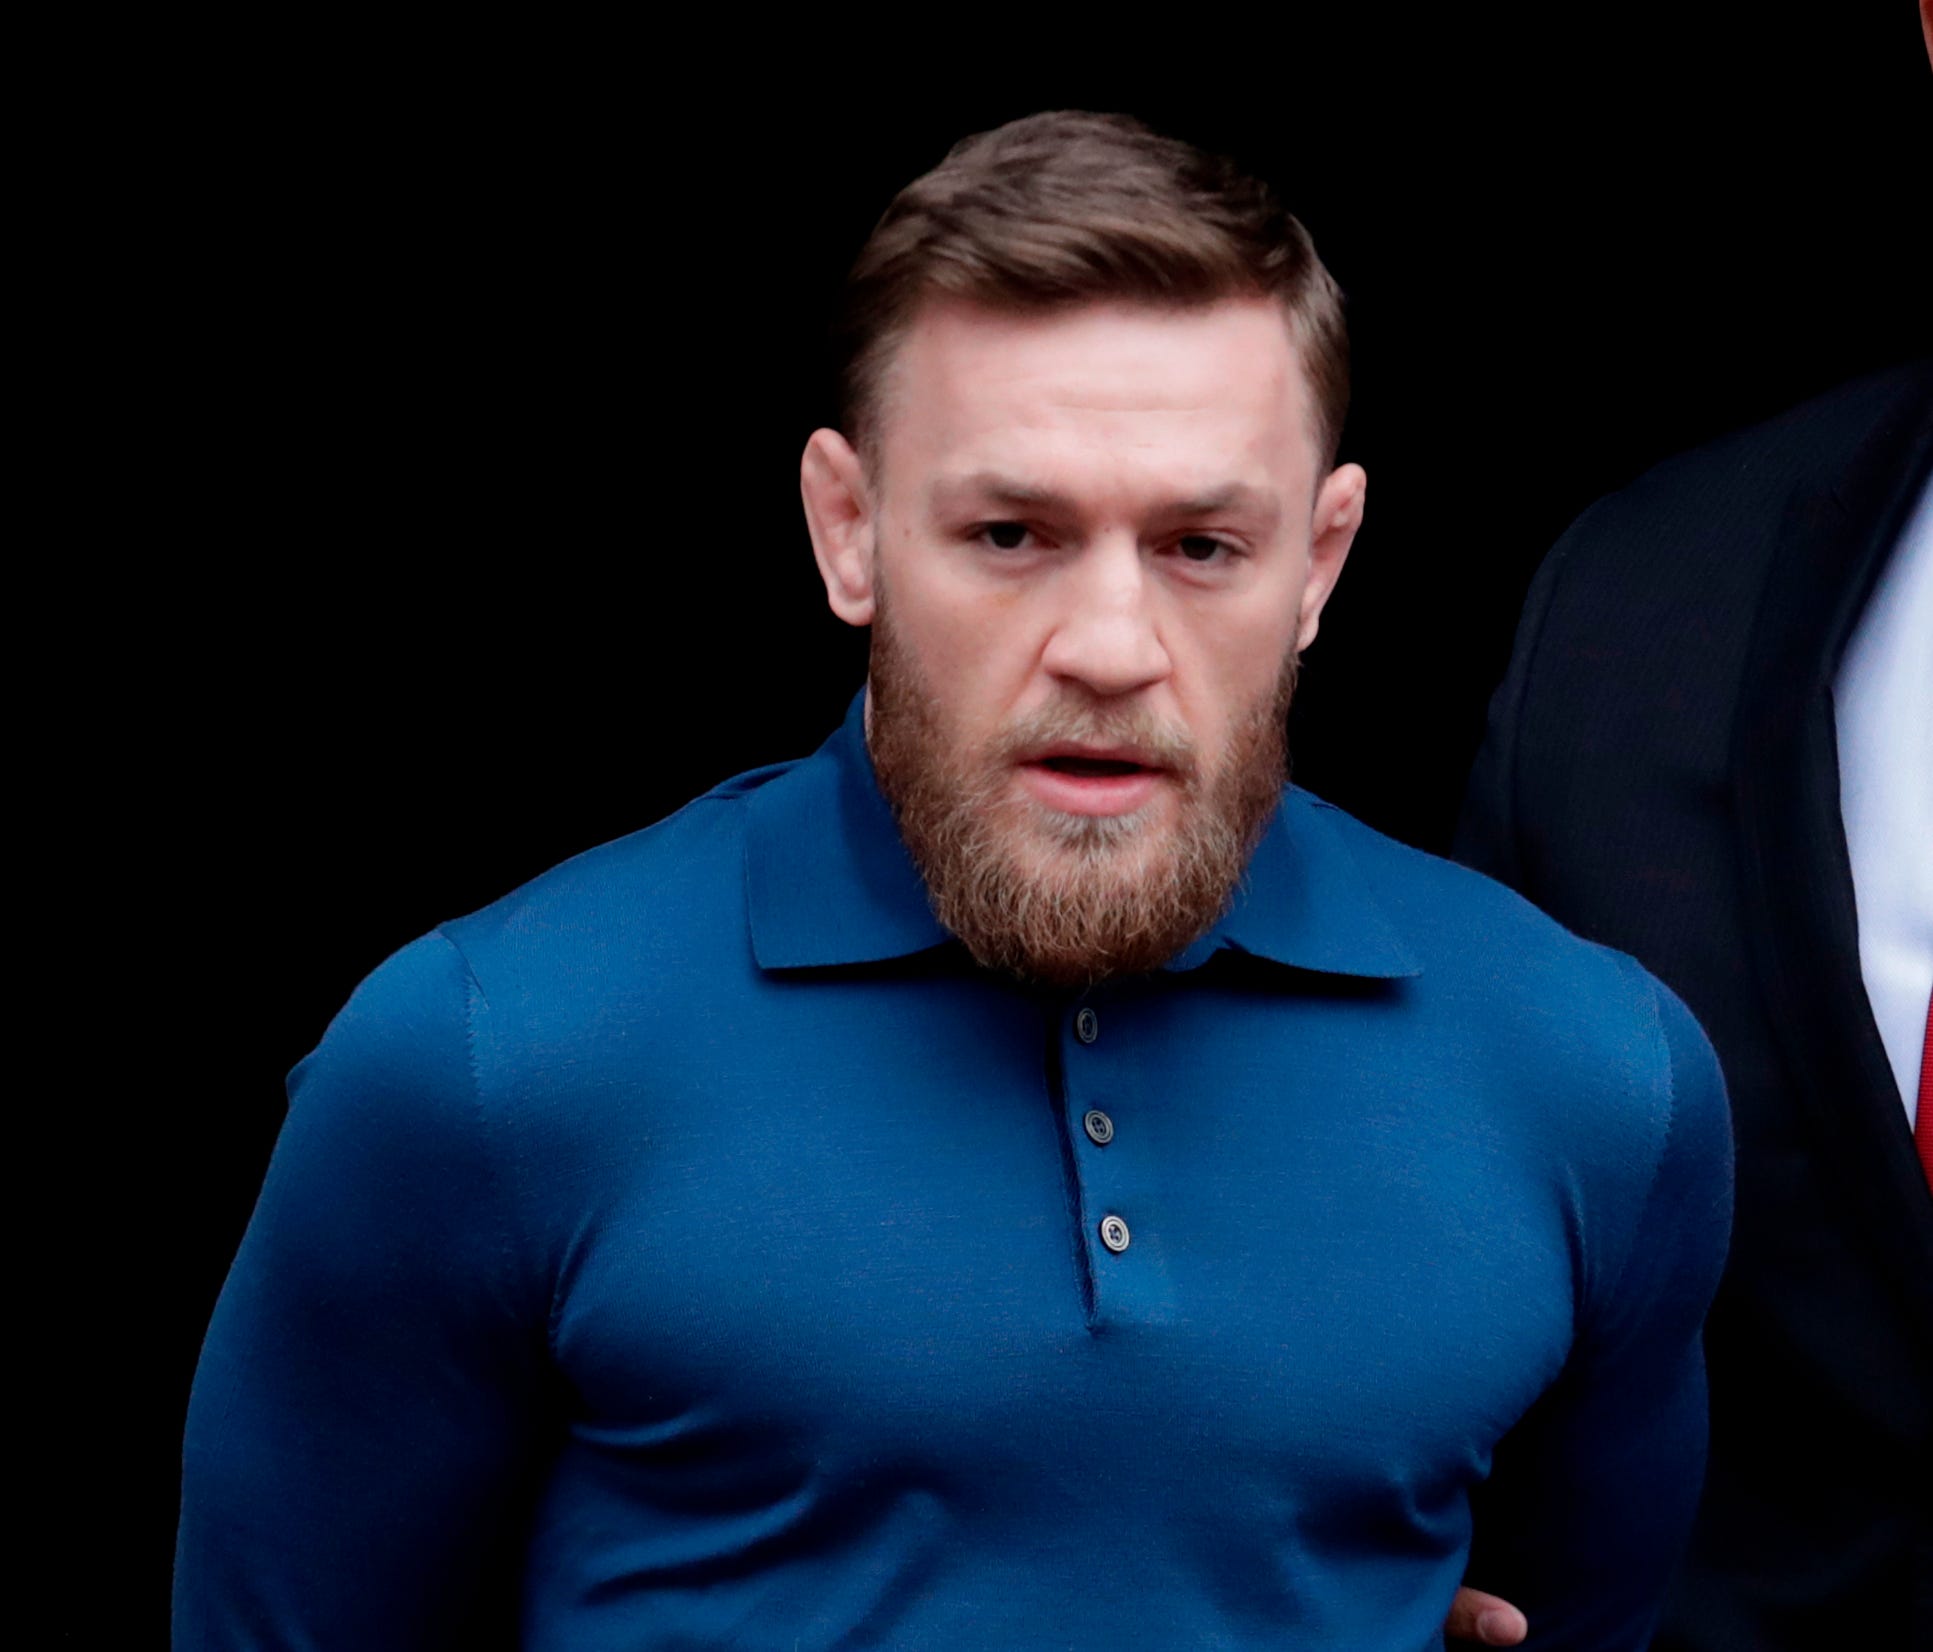 Conor McGregor is facing criminal charges in the wake of a melee he allegedly instigated after a news conference for UFC 223.